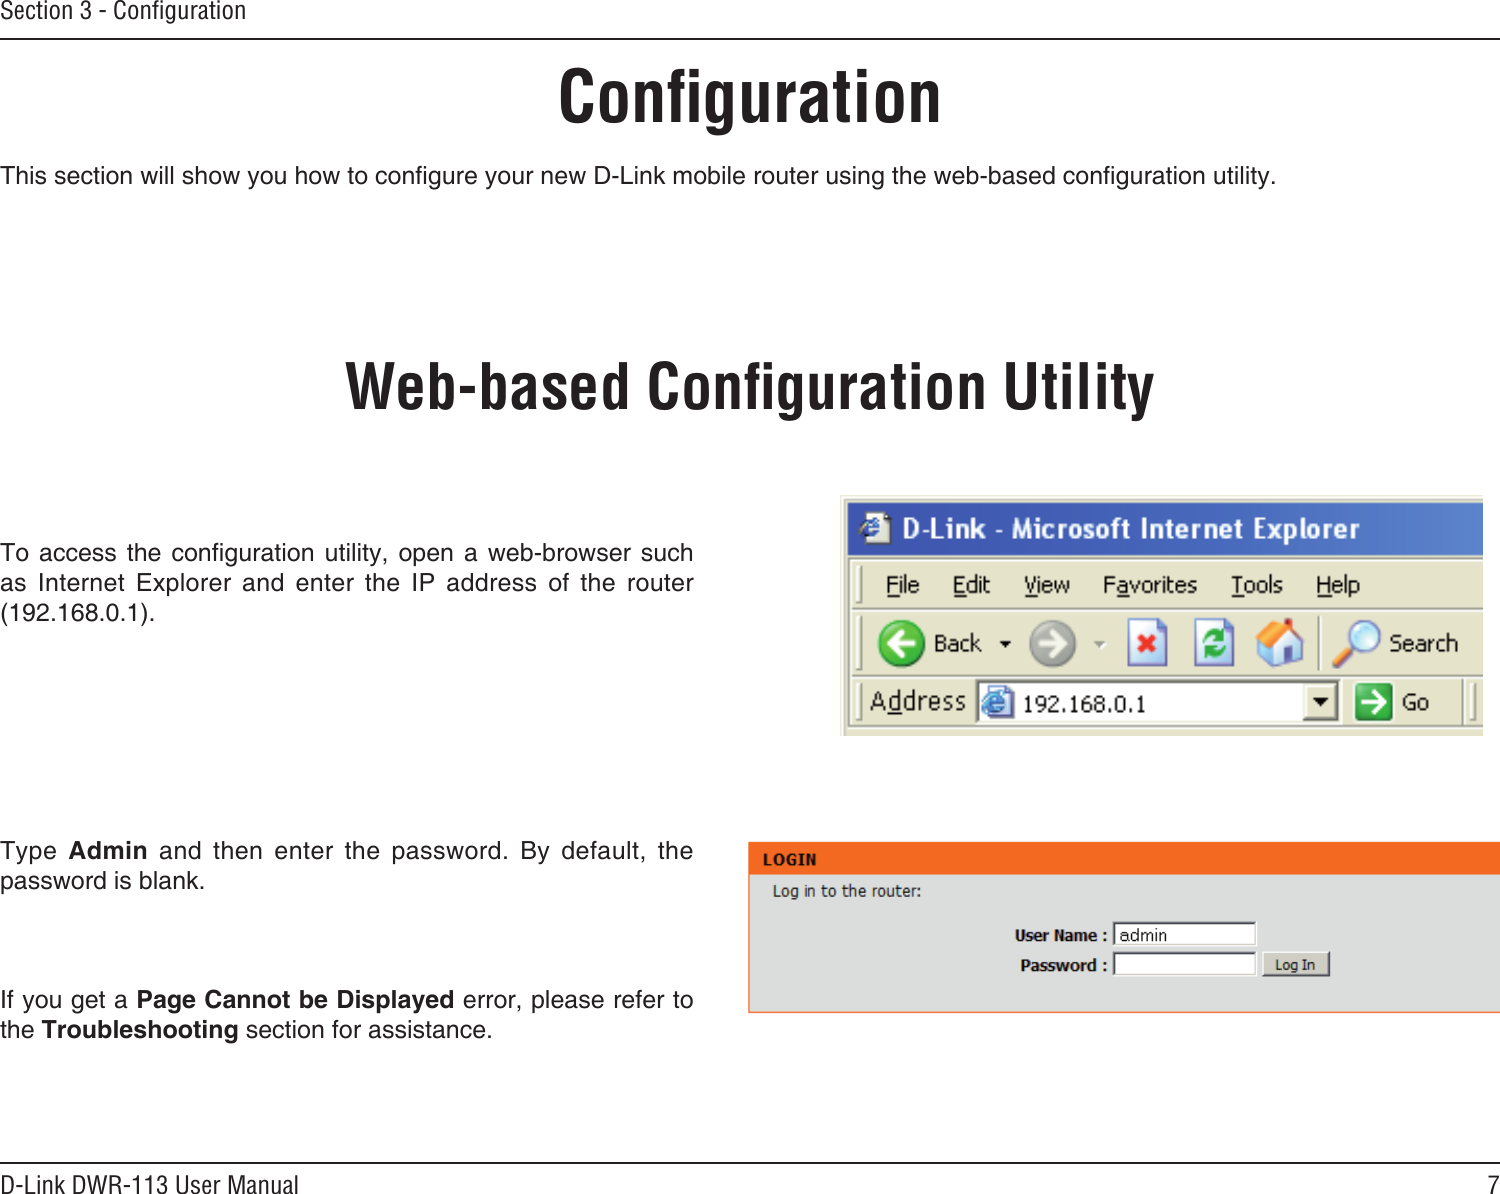 7D-Link DWR-113 User ManualSection 3 - ConﬁgurationConﬁgurationThis section will show you how to congure your new D-Link mobile router using the web-based conguration utility.Web-based Conﬁguration UtilityTo access  the conguration  utility,  open  a  web-browser  such as  Internet  Explorer  and  enter  the  IP  address  of  the  router (192.168.0.1).Type  Admin  and  then  enter  the  password.  By  default,  the password is blank.If you get a Page Cannot be Displayed error, please refer to the Troubleshooting section for assistance.